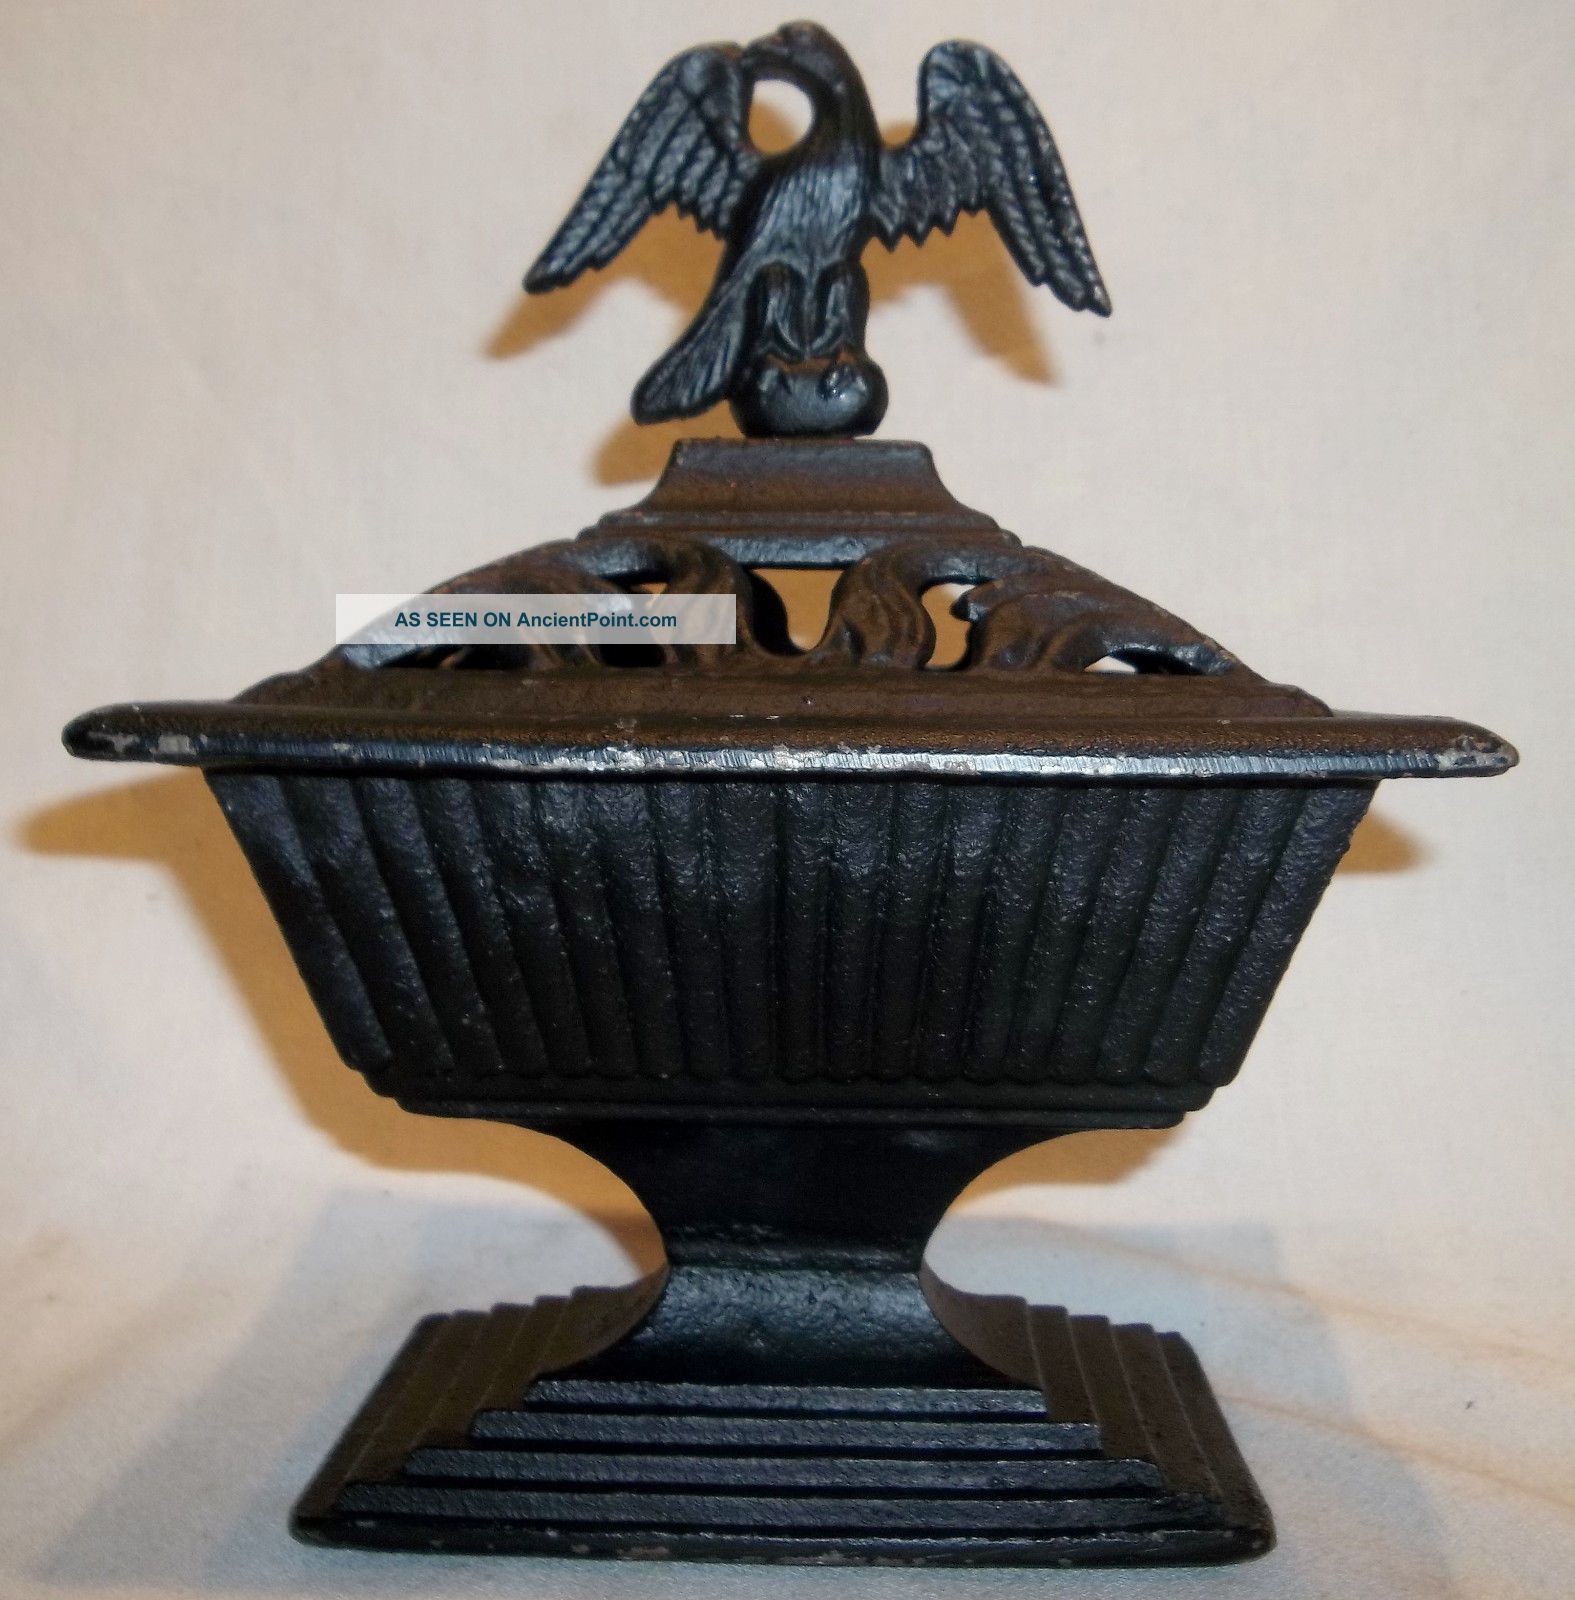 Vntg Cast Iron Eagle Wood Coal Stove Humidifier Steamer Virginia Metalcrafters Hearth Ware photo